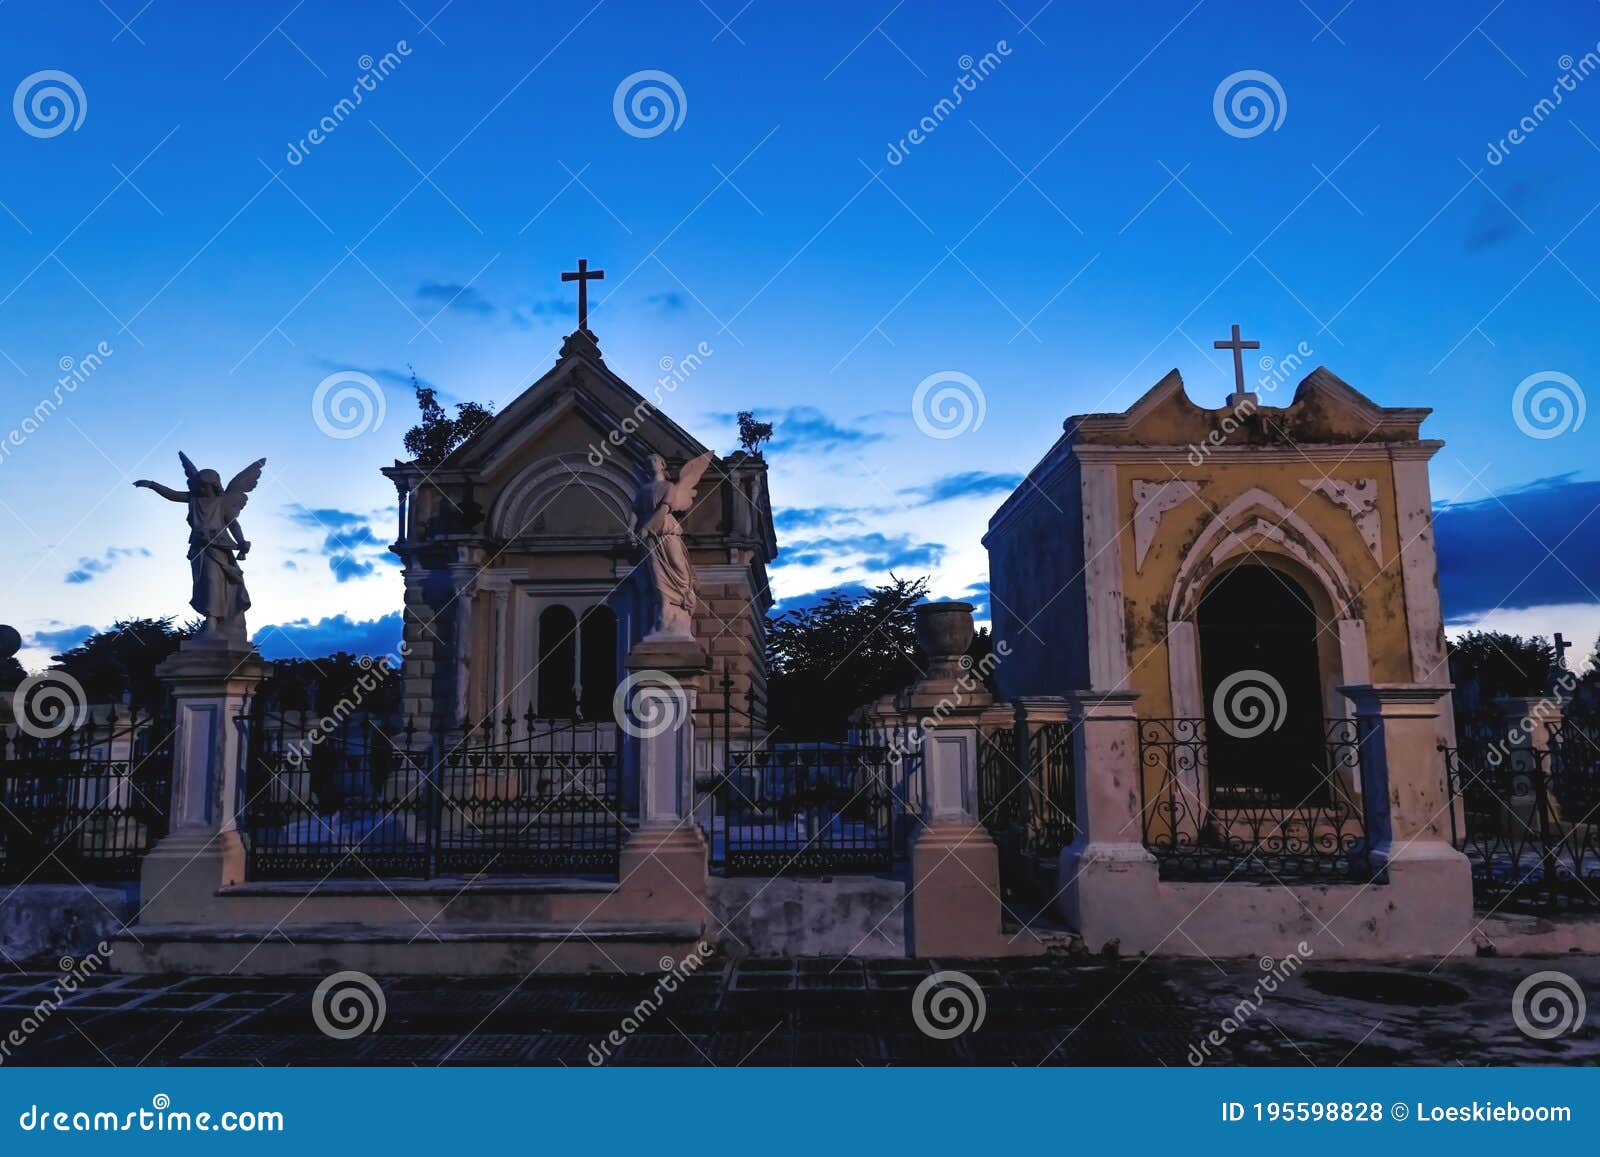 graveyard tombs with crosses and angel statues at the cemetery `cementerio general` in merida, yucatan, mexico